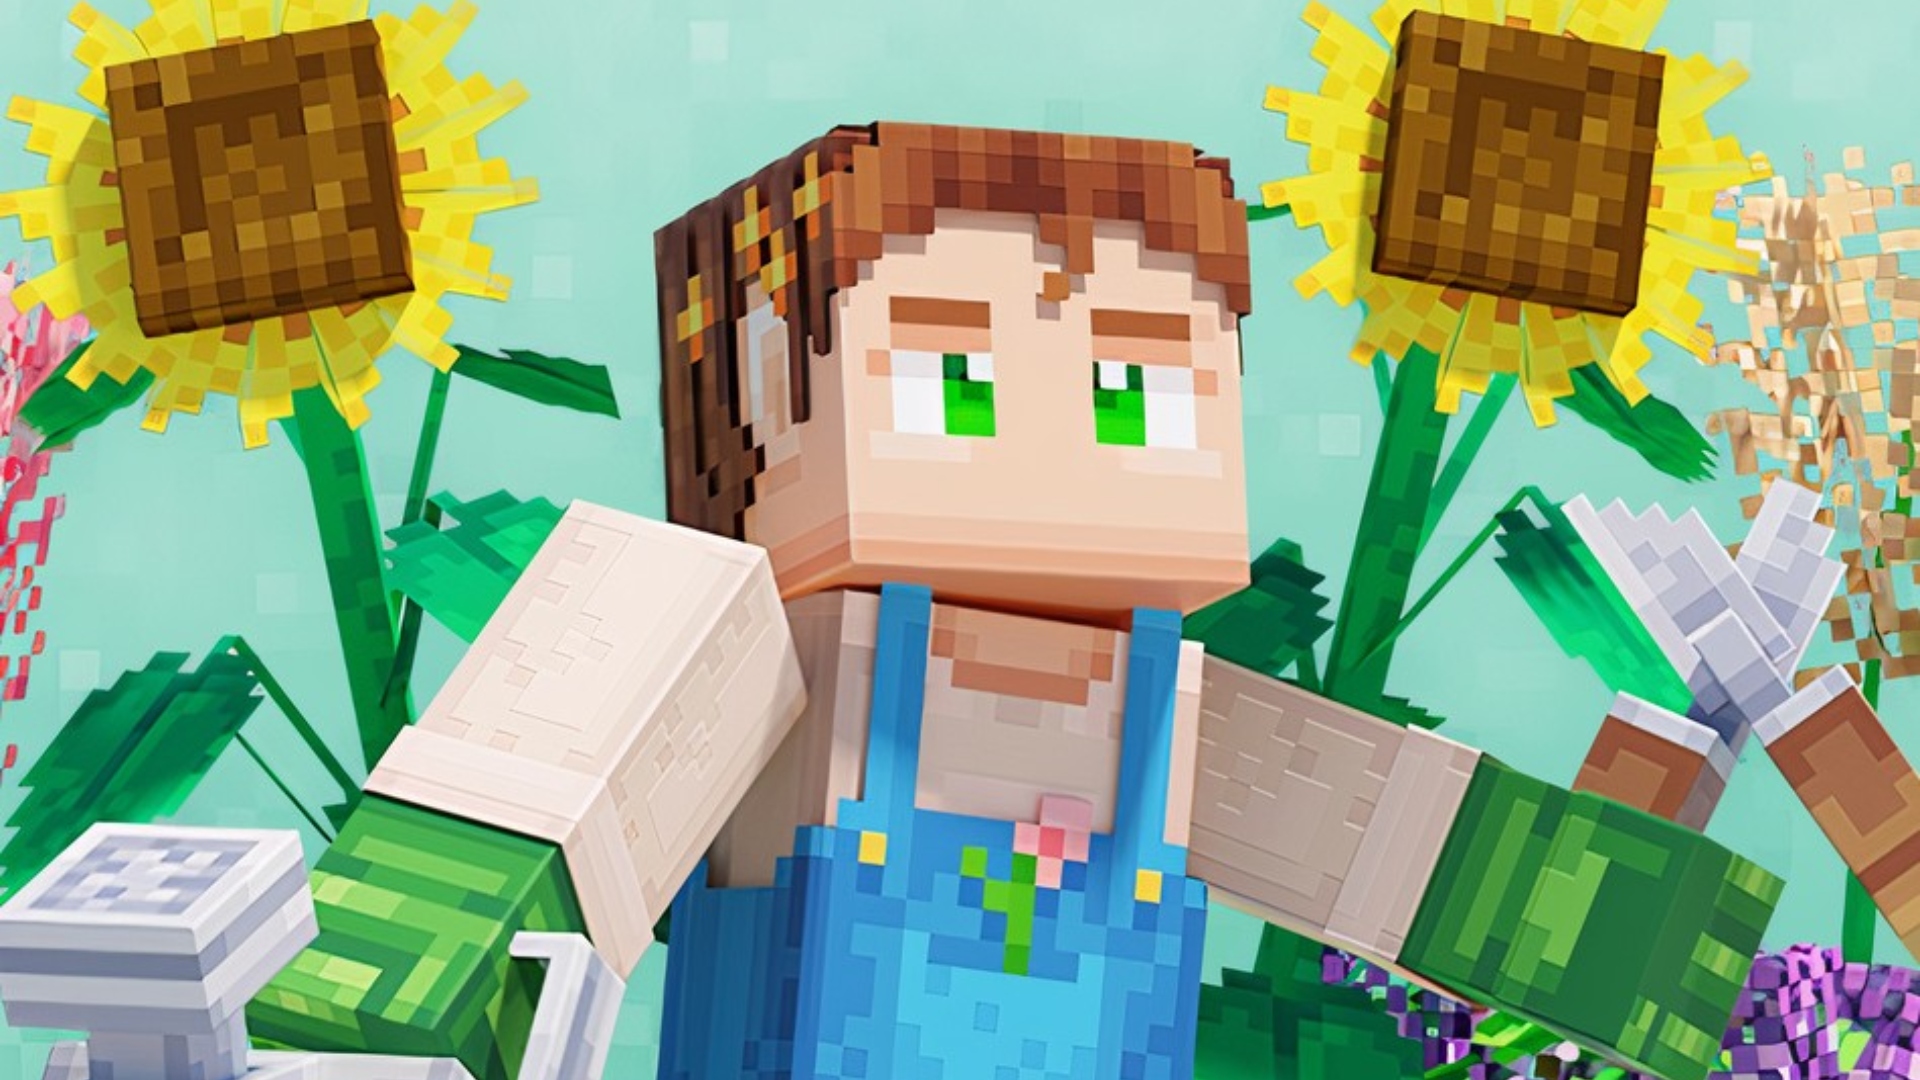 Vis stedet strimmel grill Minecraft is about to get a new boss says Mojang – and a villager | PCGamesN